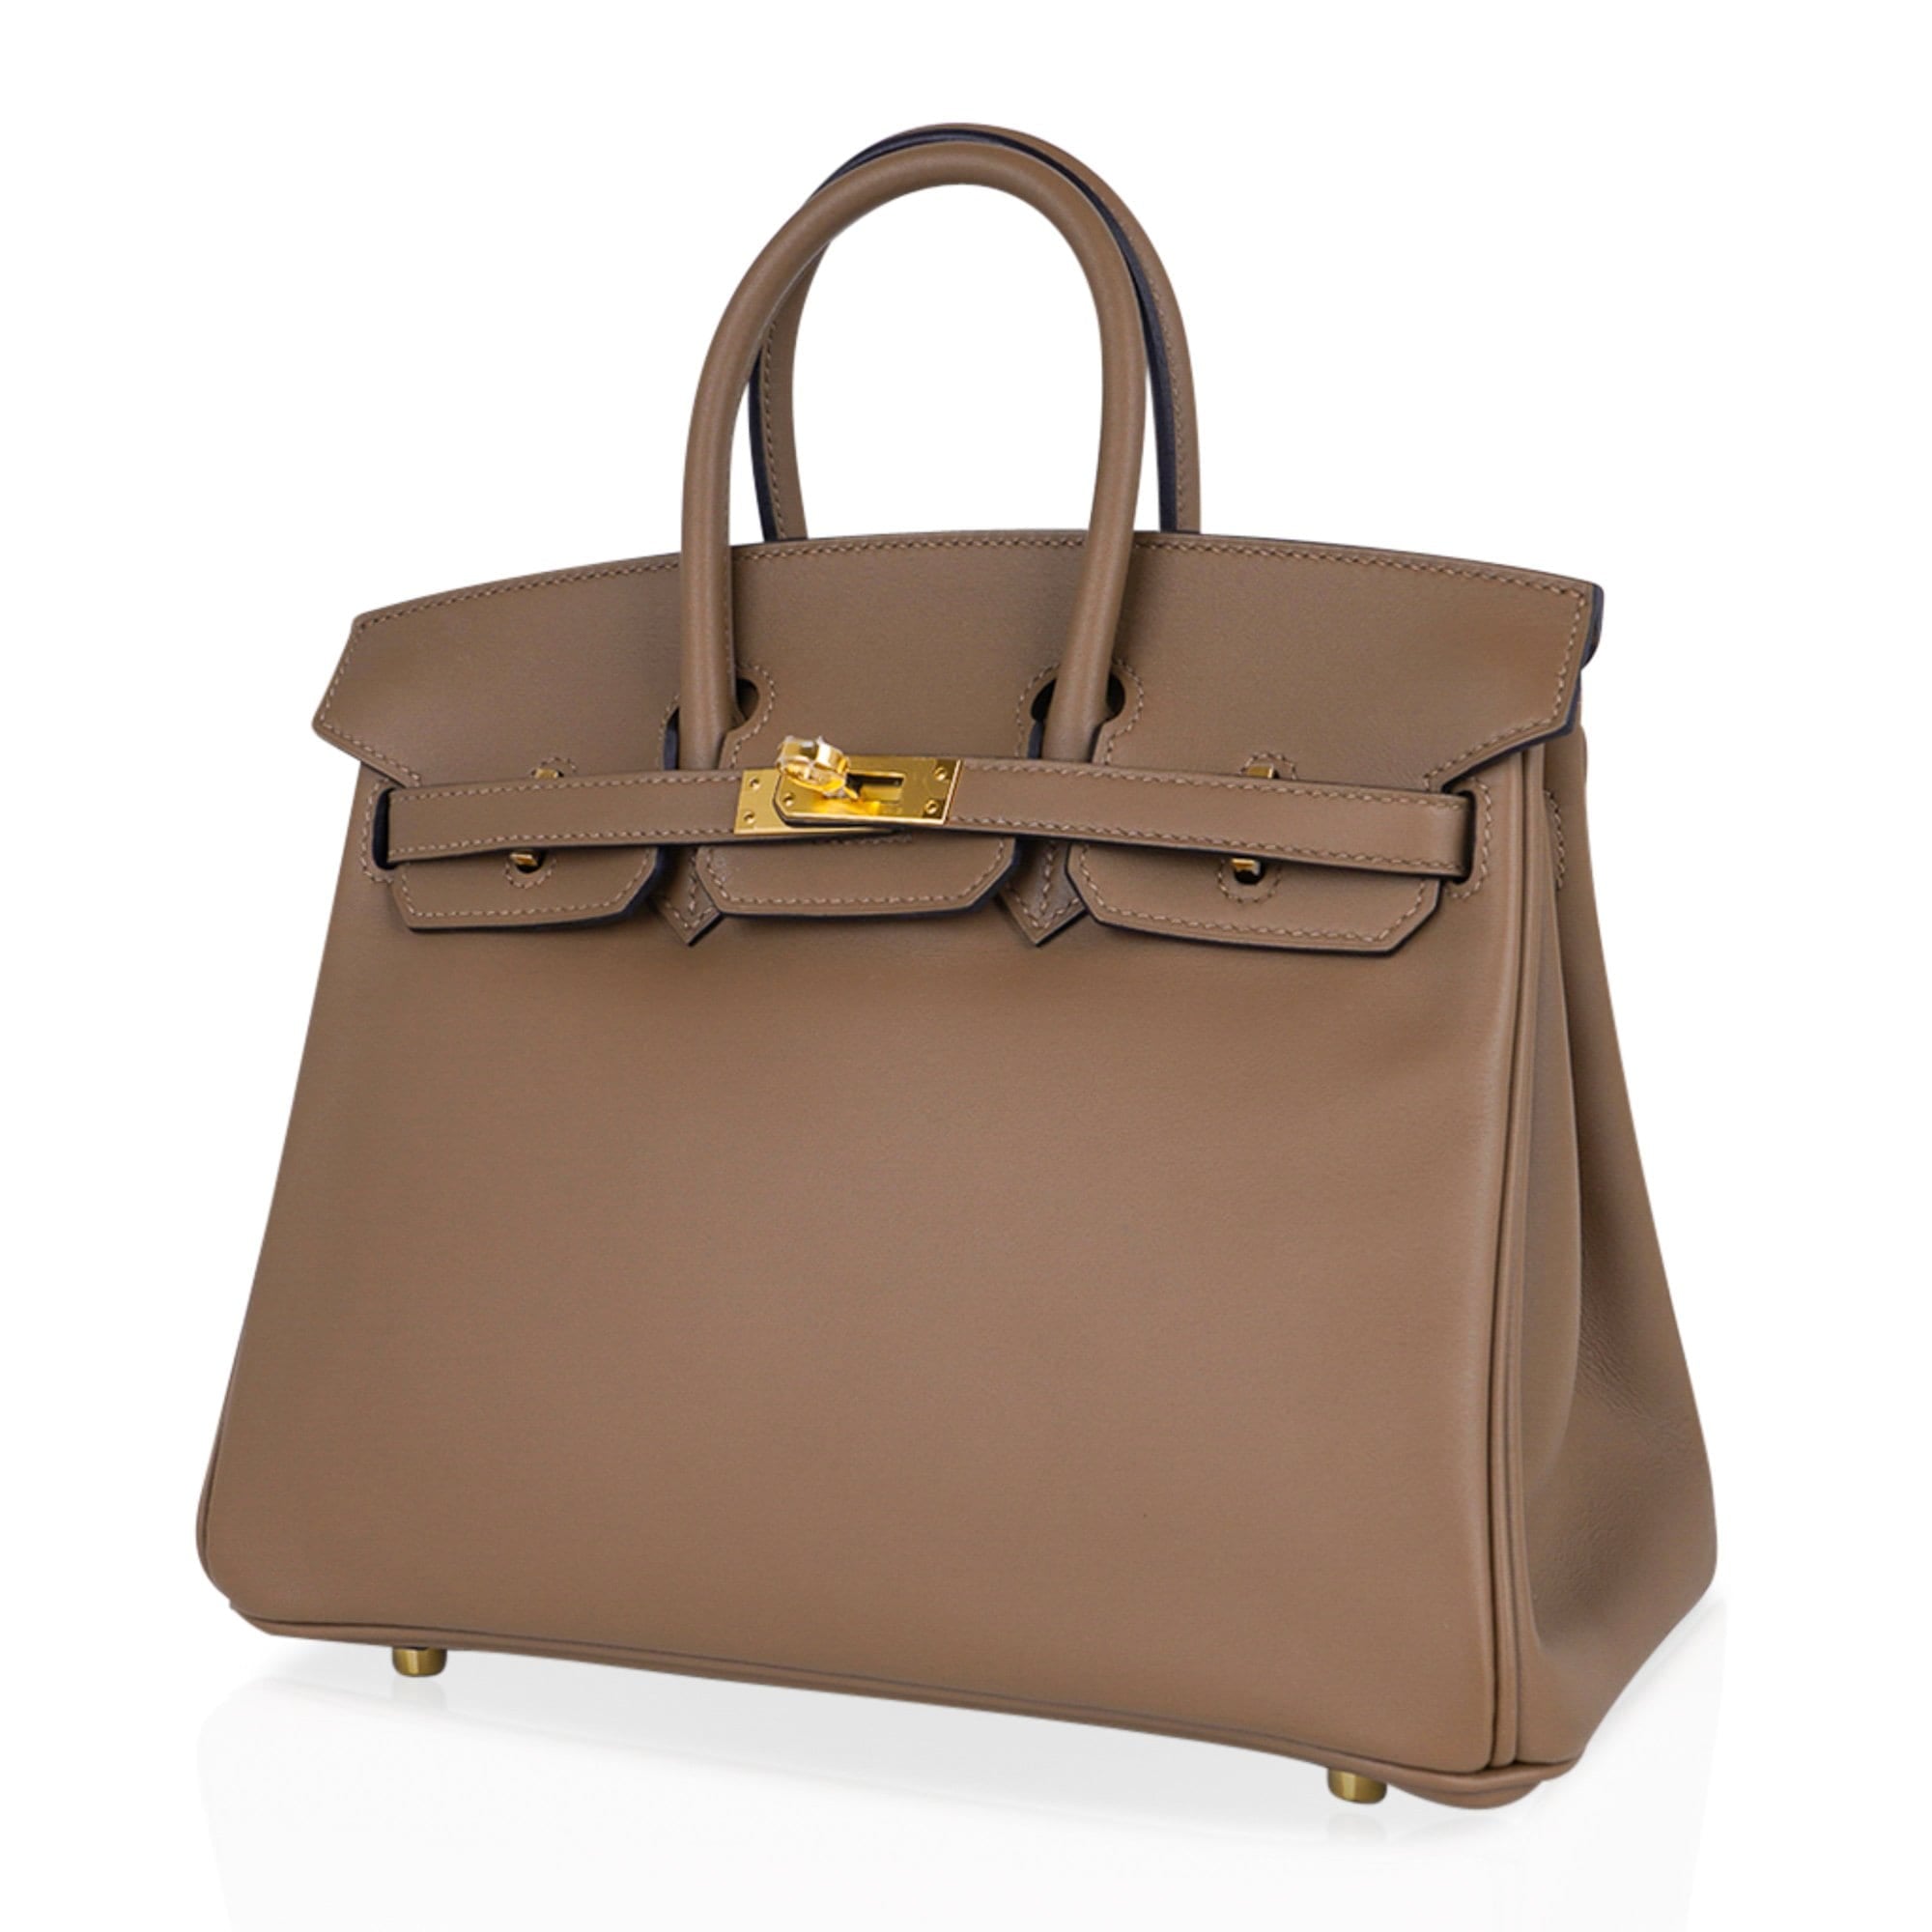 HERMÈS Birkin 25 handbag in Craie Jonathan leather with Gold hardware-Ginza  Xiaoma – Authentic Hermès Boutique